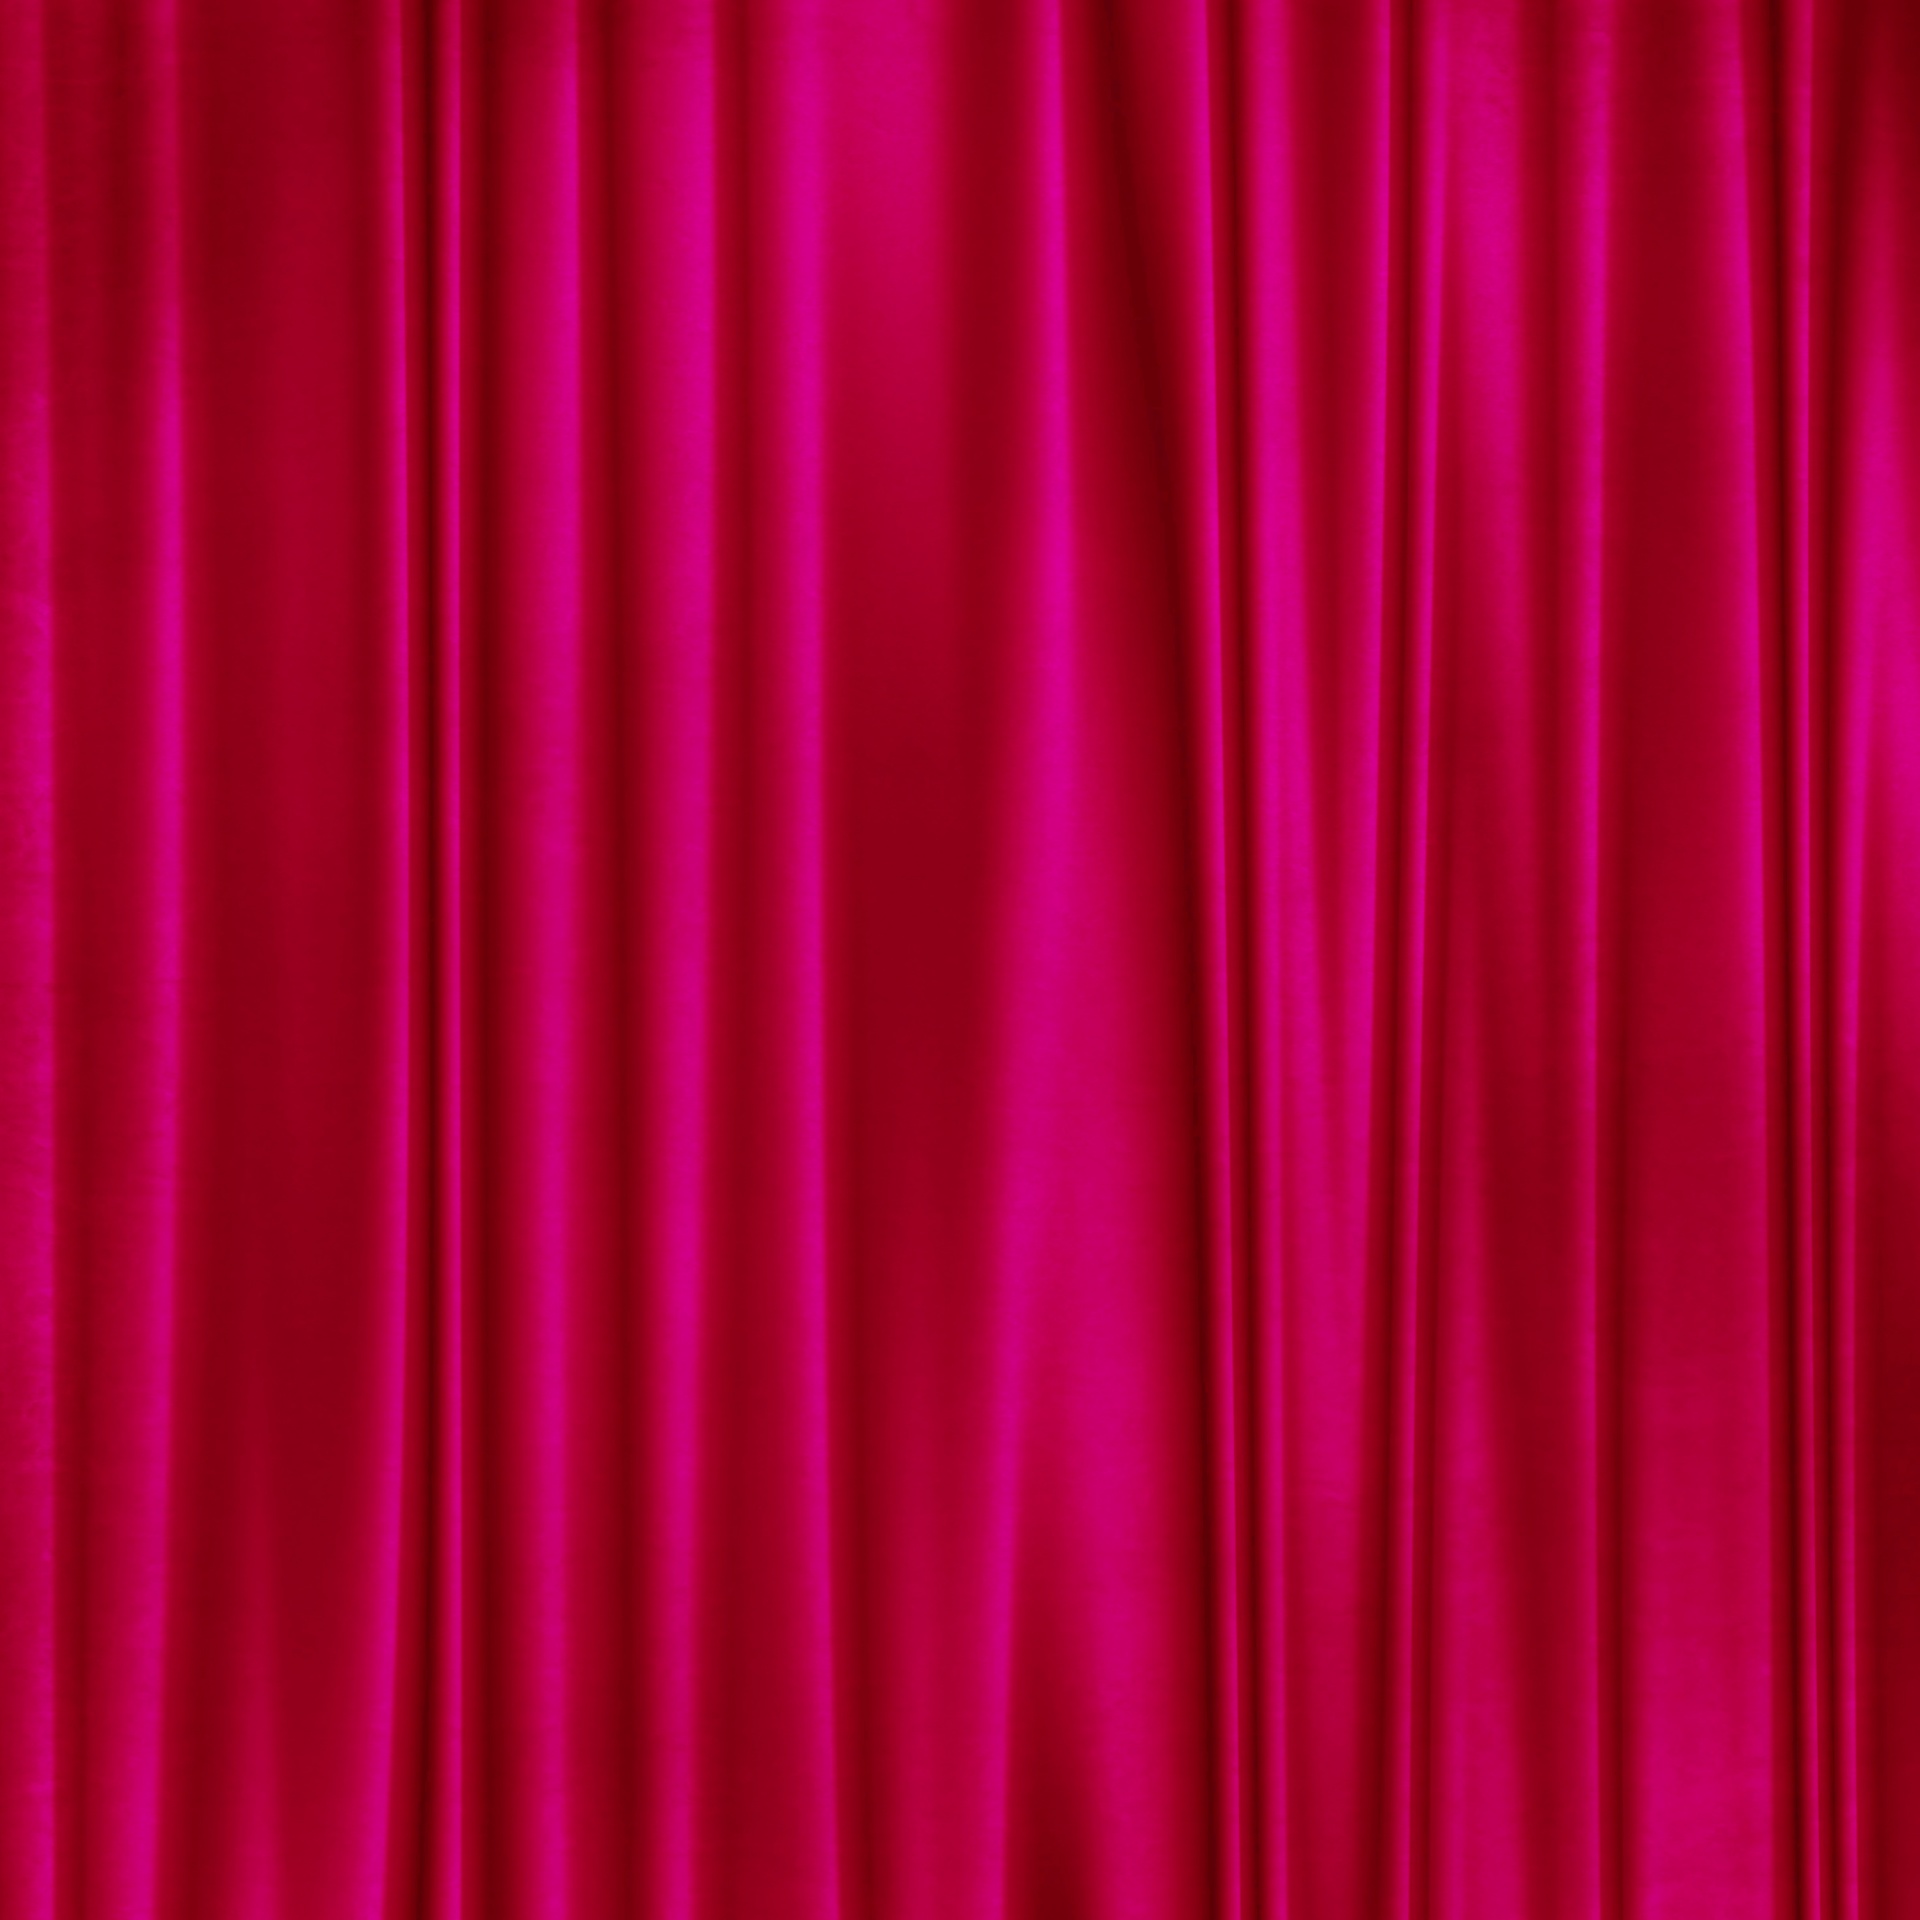 Drapes,curtain,backdrop,red,pink - free image from 